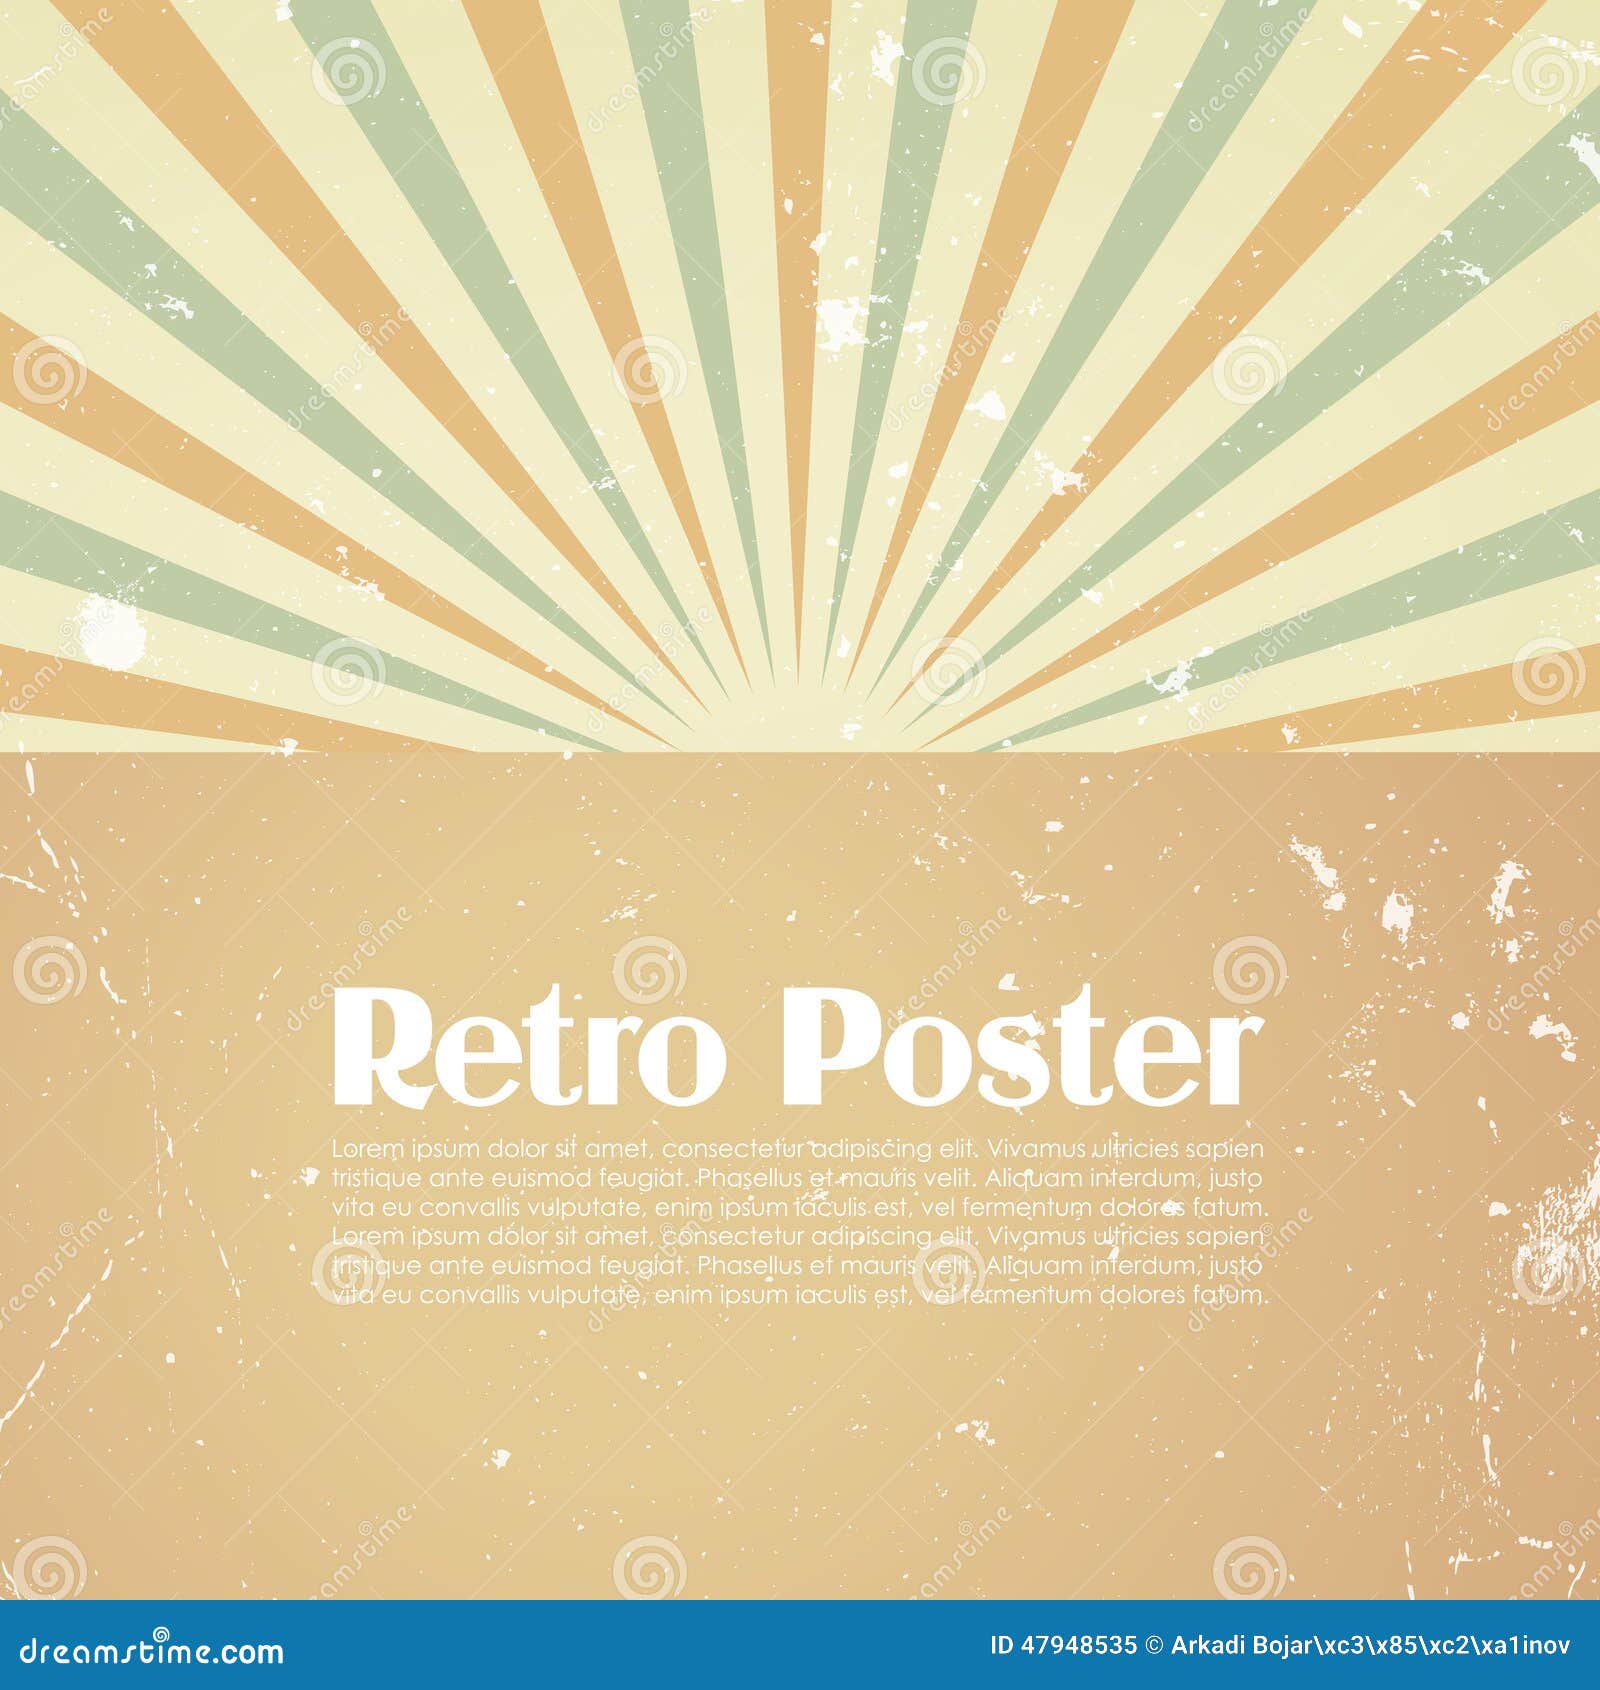 Retro poster template stock vector. Illustration of page - 47948535